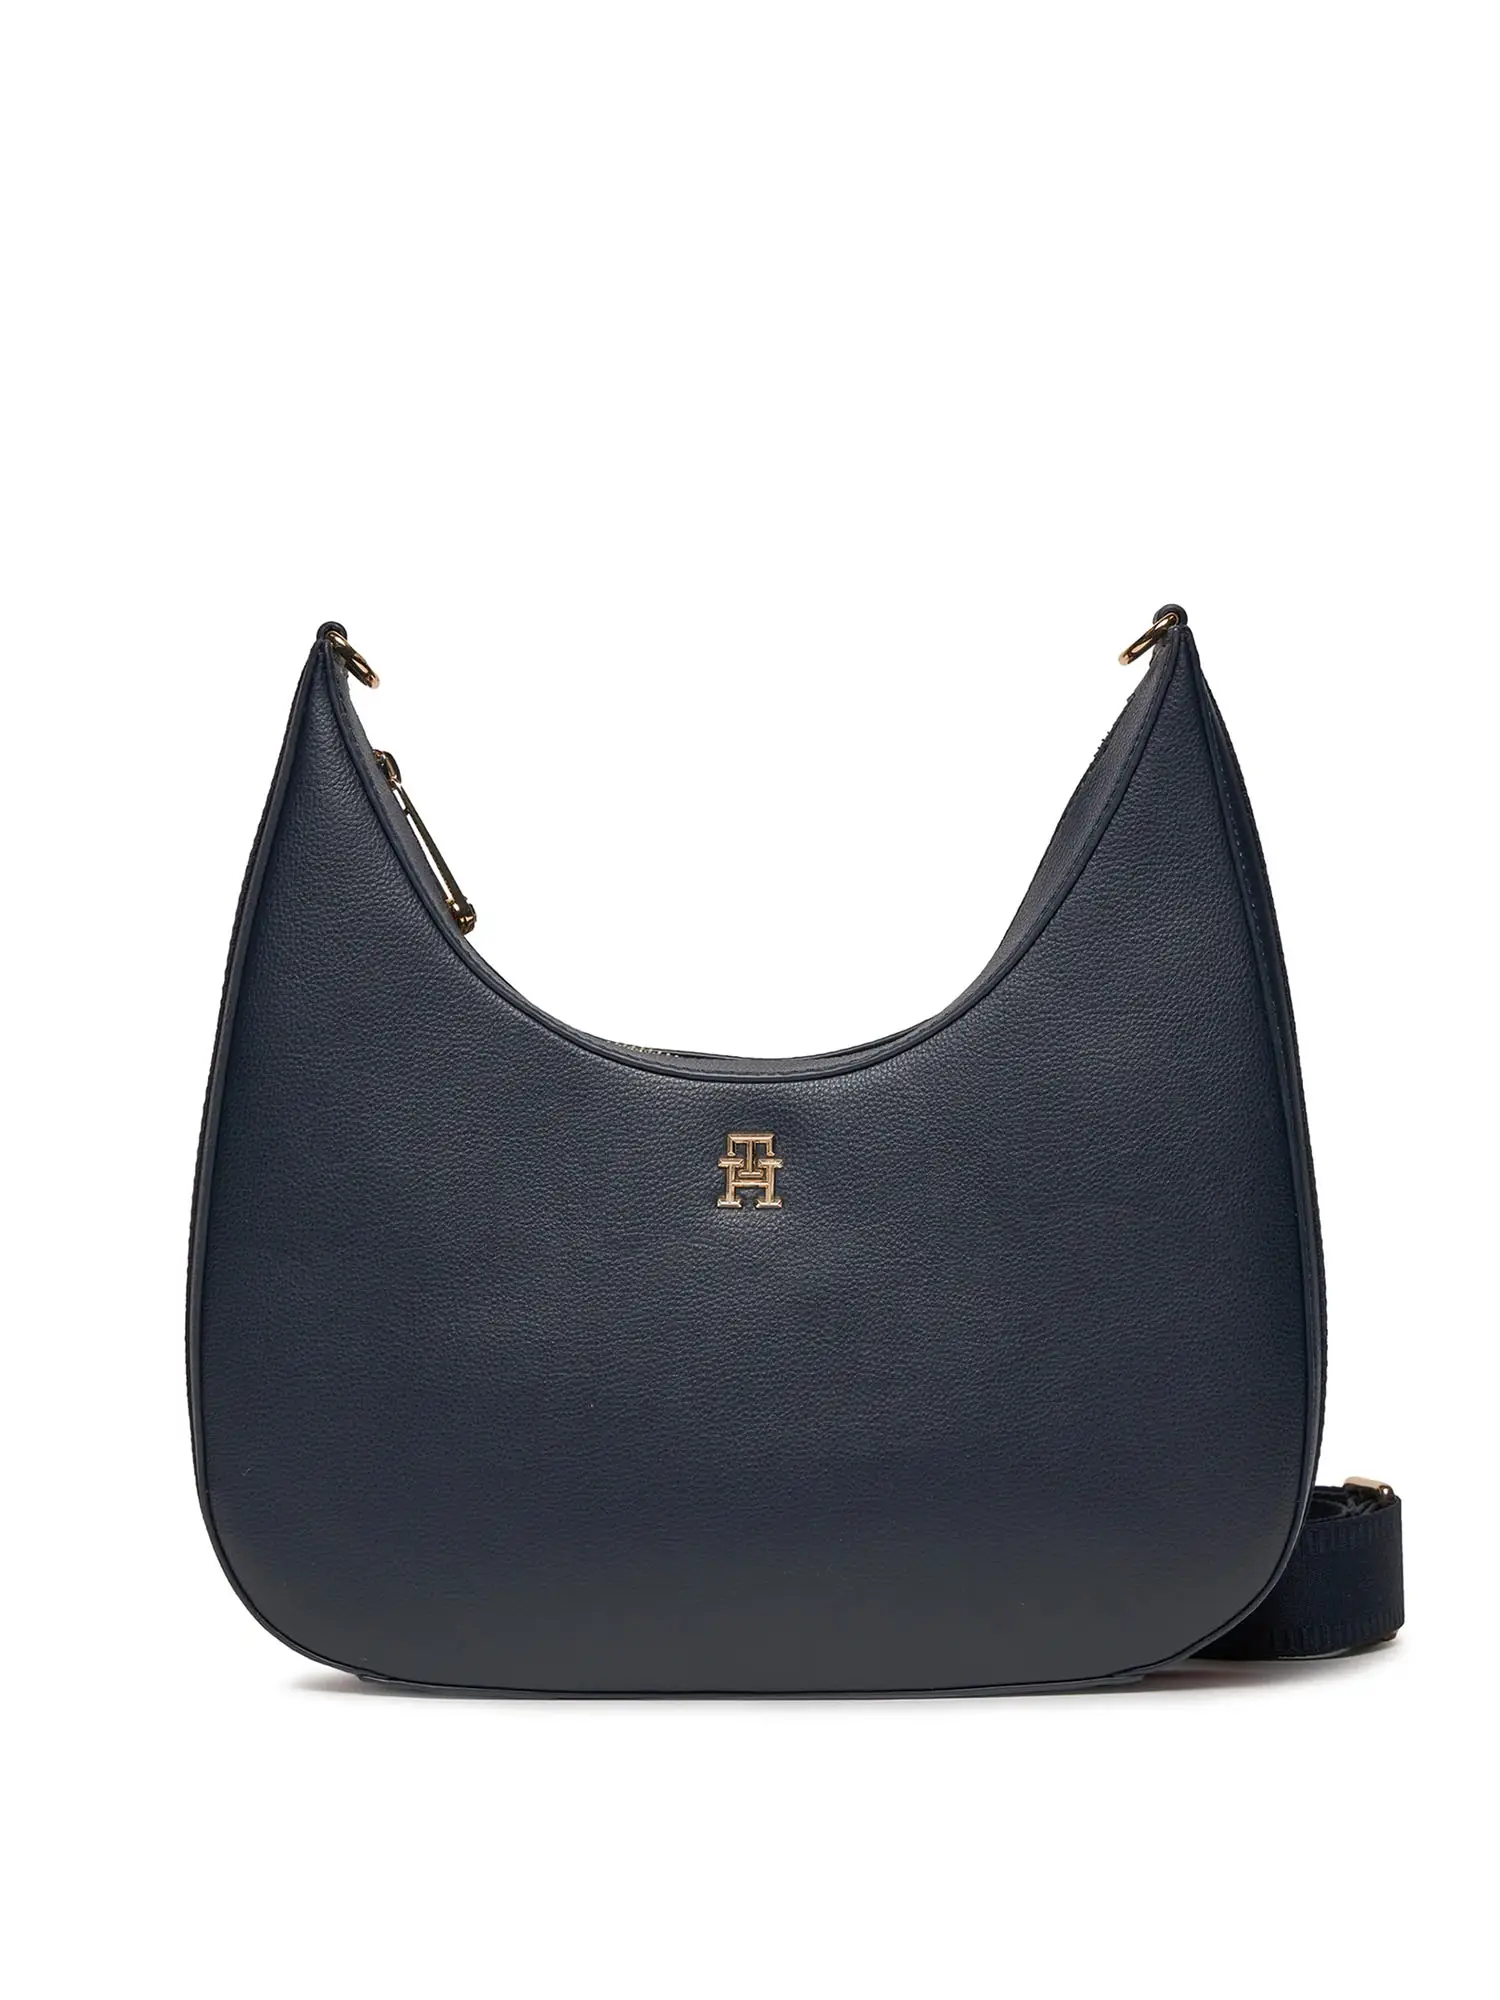 TRACOLLA DONNA - TOMMY HILFIGER - AW0AW16088 - BLU, UNICA